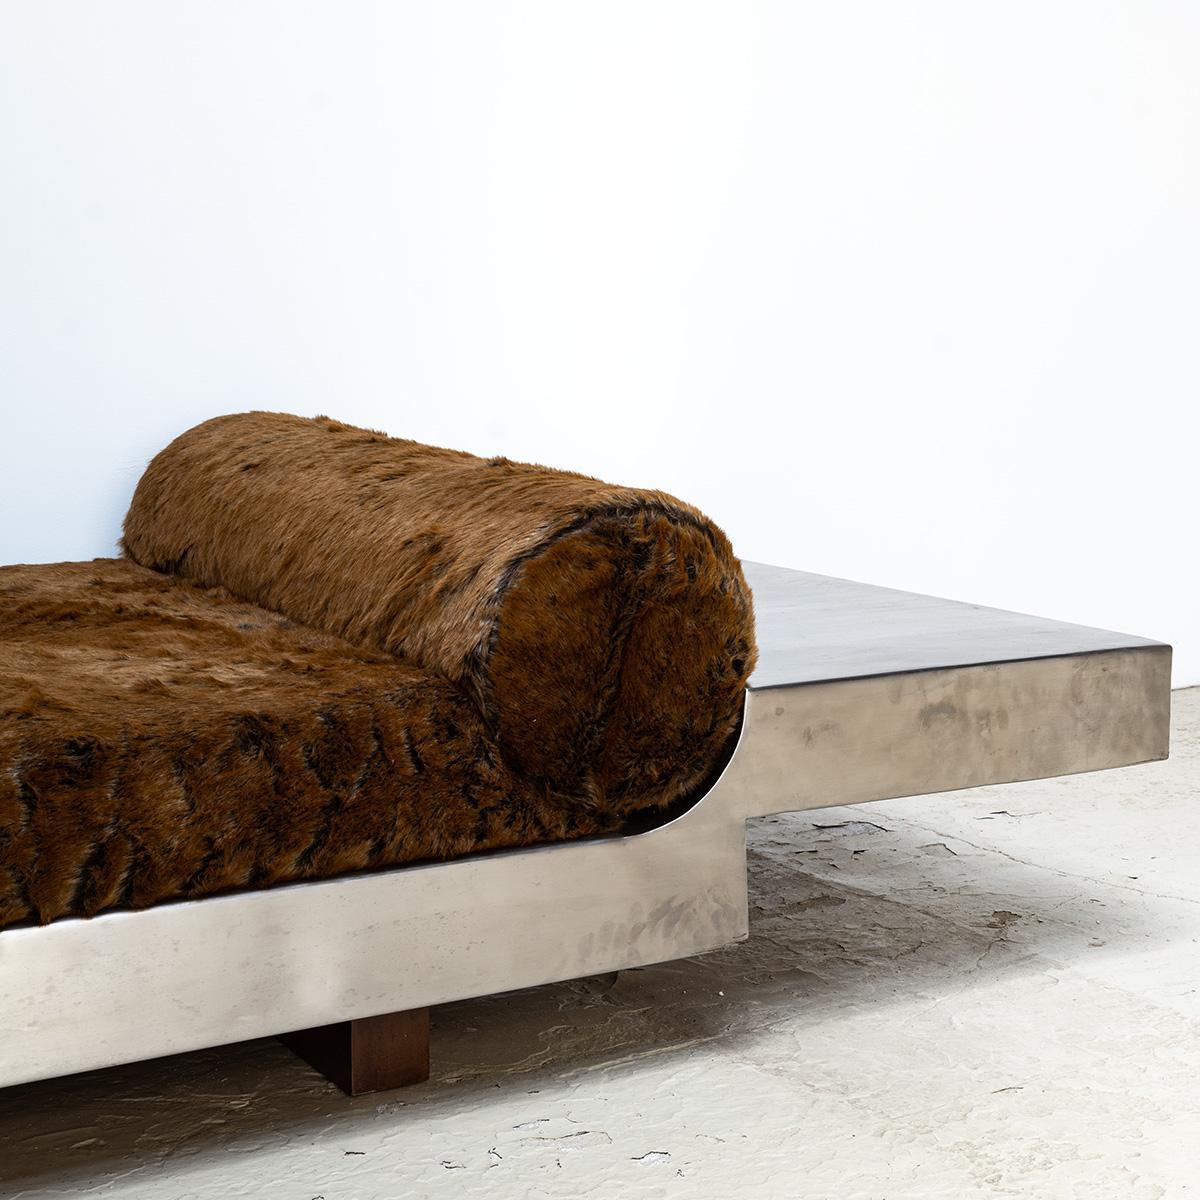 Stainless Steel One Arm “Banquet” Bed, Maria Pergay, C. 1967 For Sale